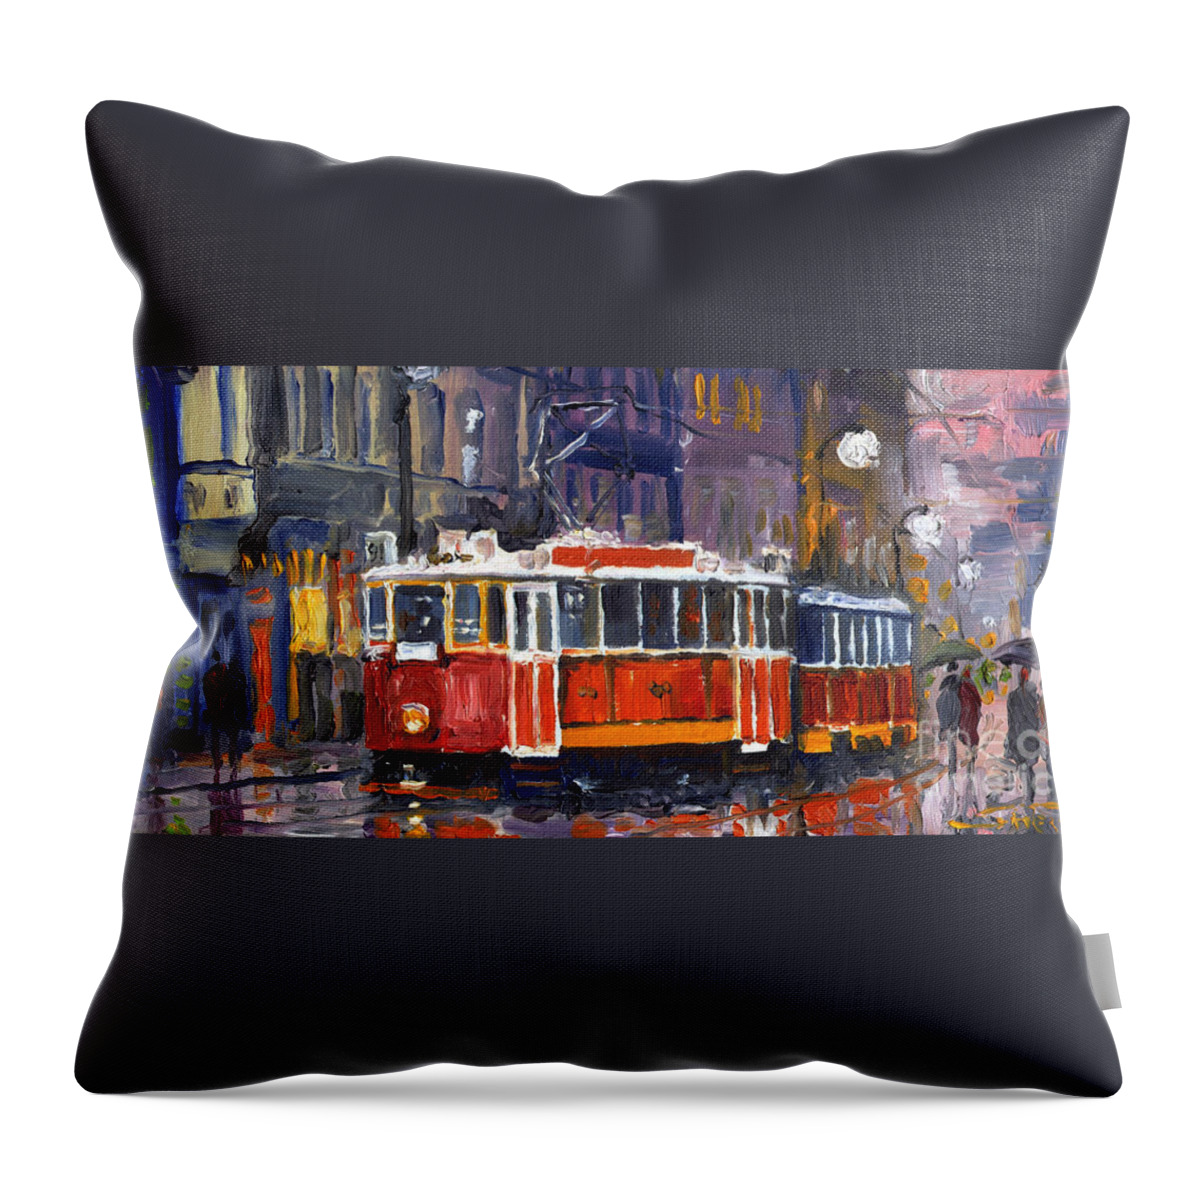 Oil Throw Pillow featuring the painting Prague Old Tram 09 by Yuriy Shevchuk